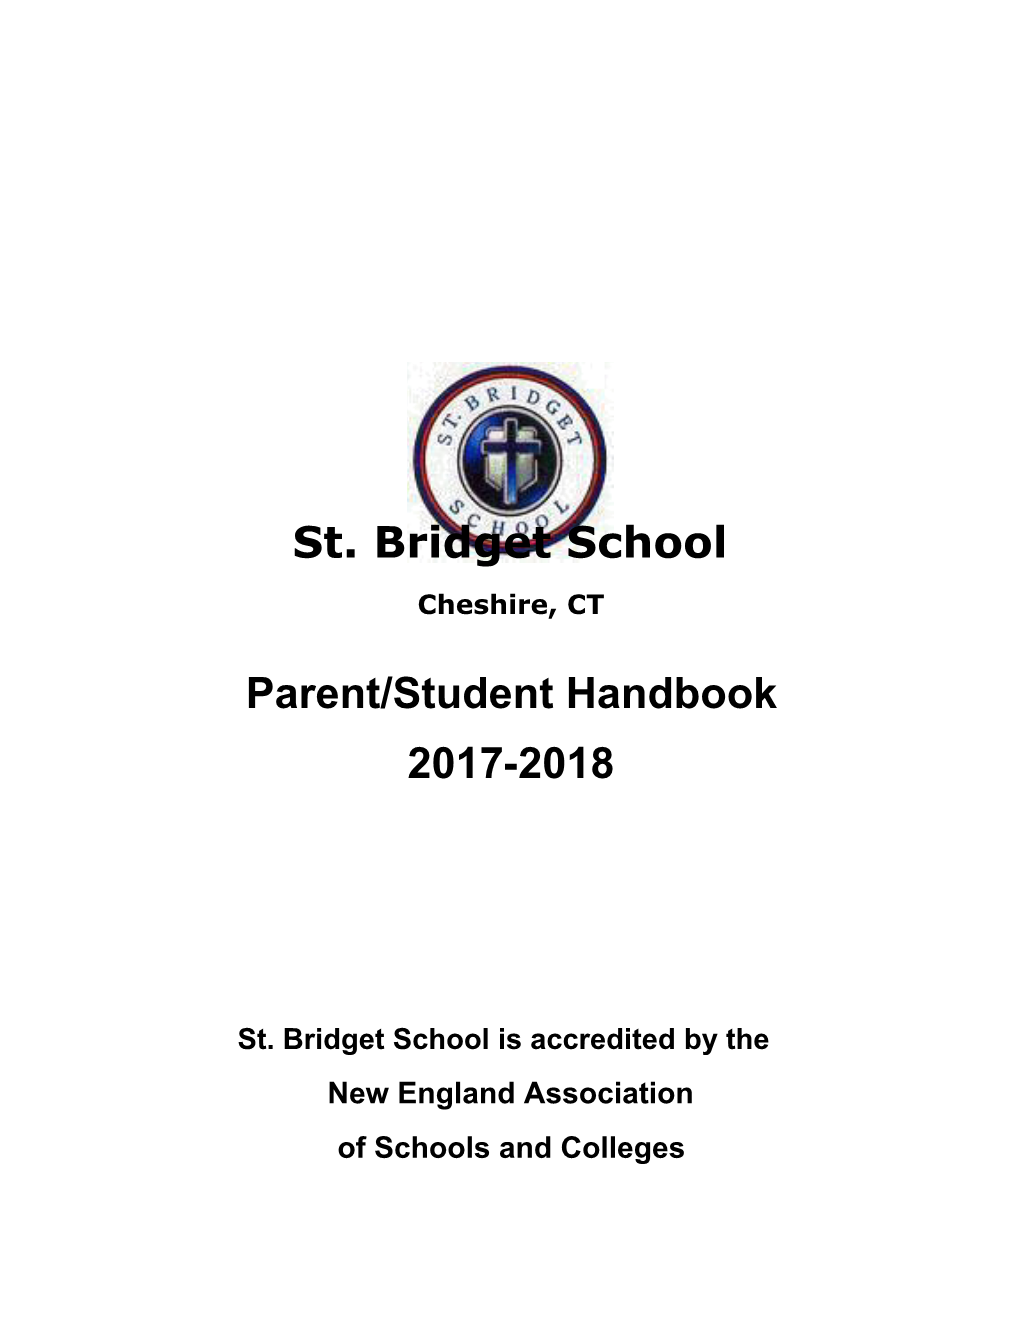 St. Bridget School Is Accredited by The